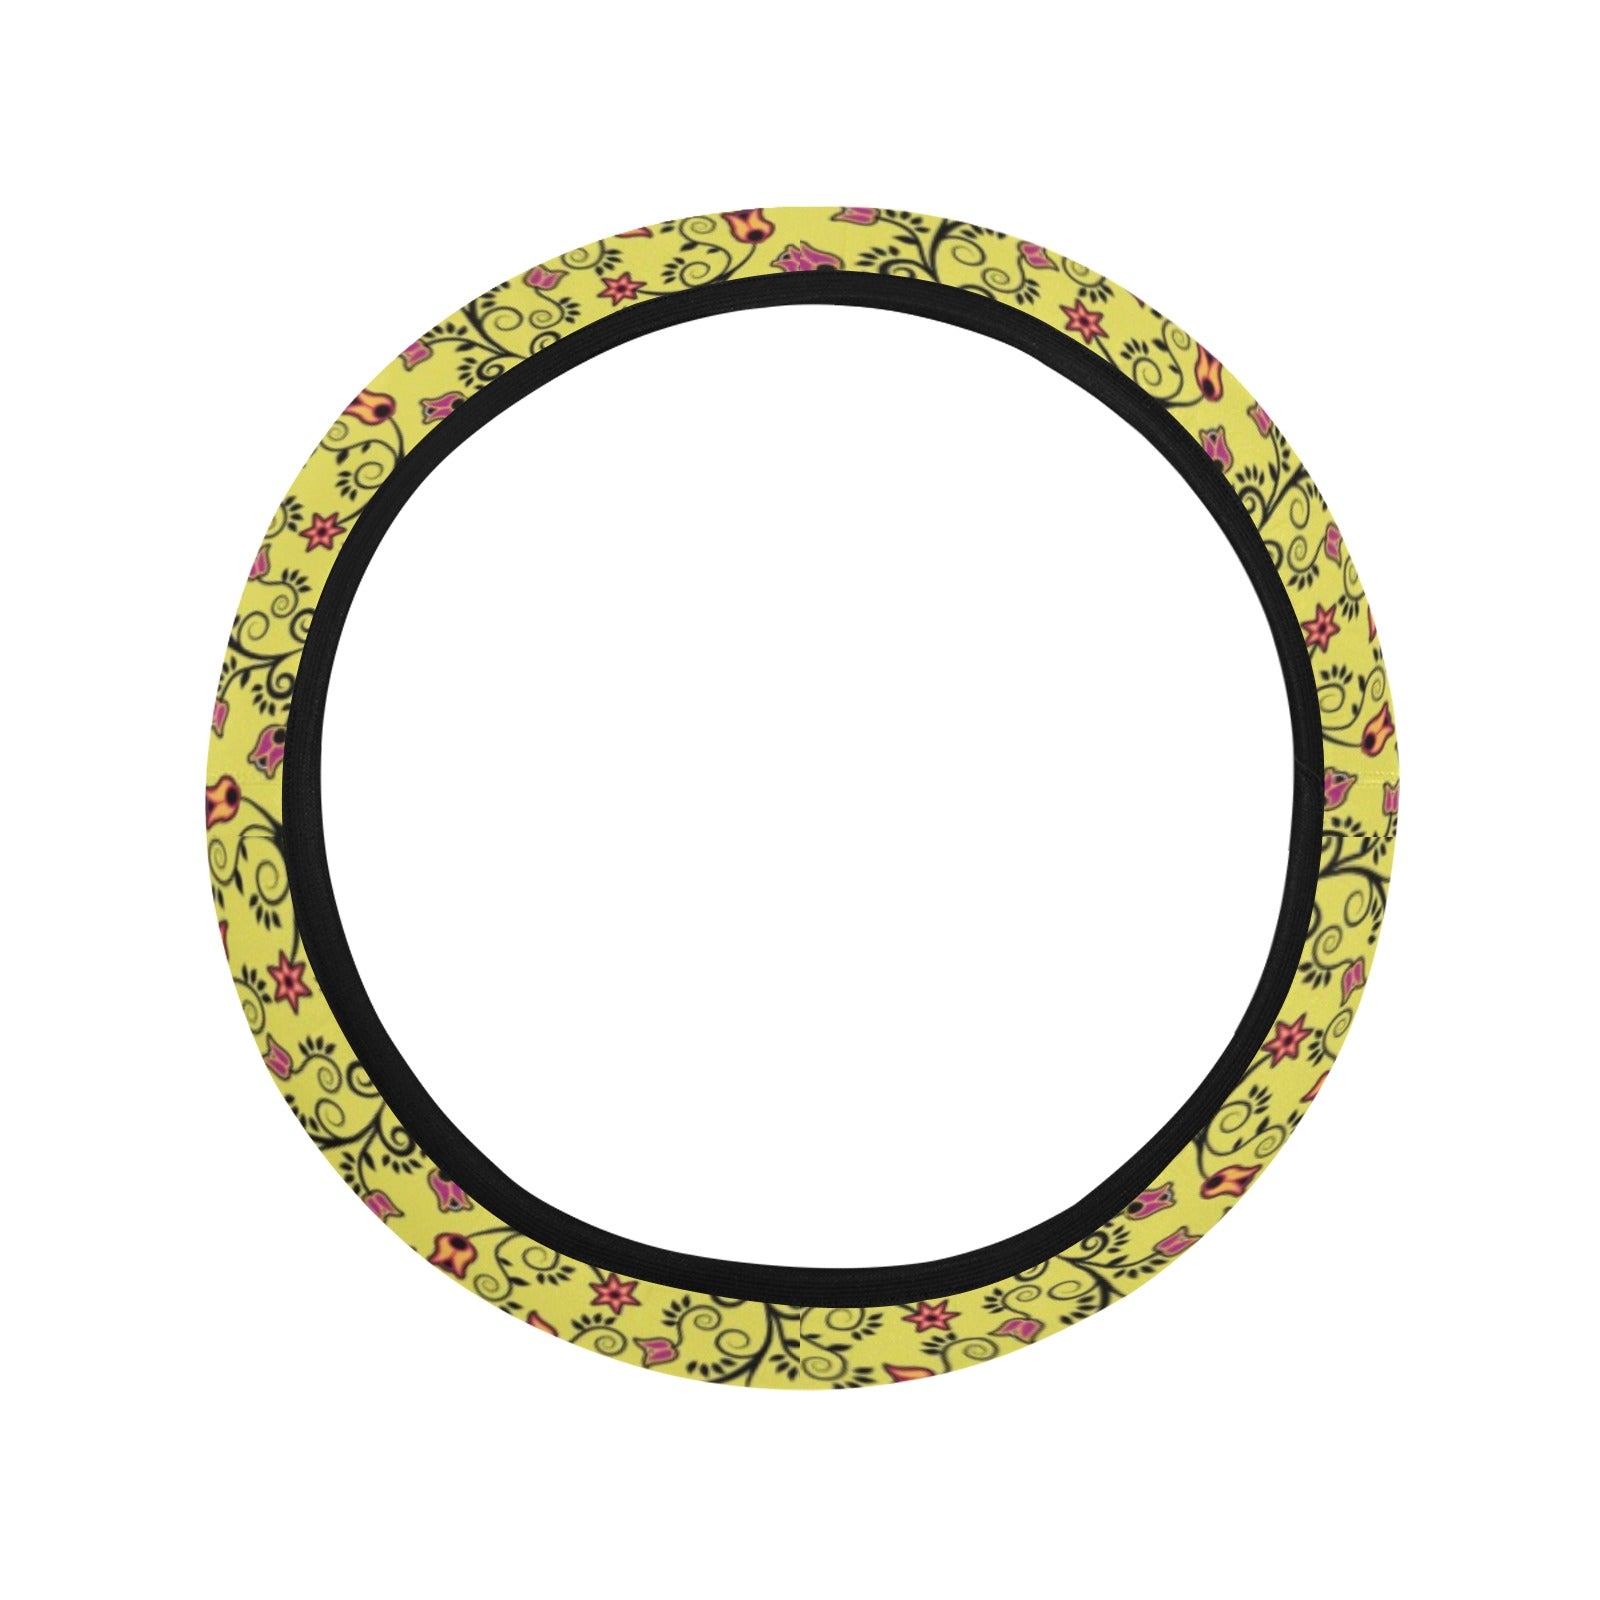 Key Lime Star Steering Wheel Cover with Elastic Edge Steering Wheel Cover with Elastic Edge e-joyer 